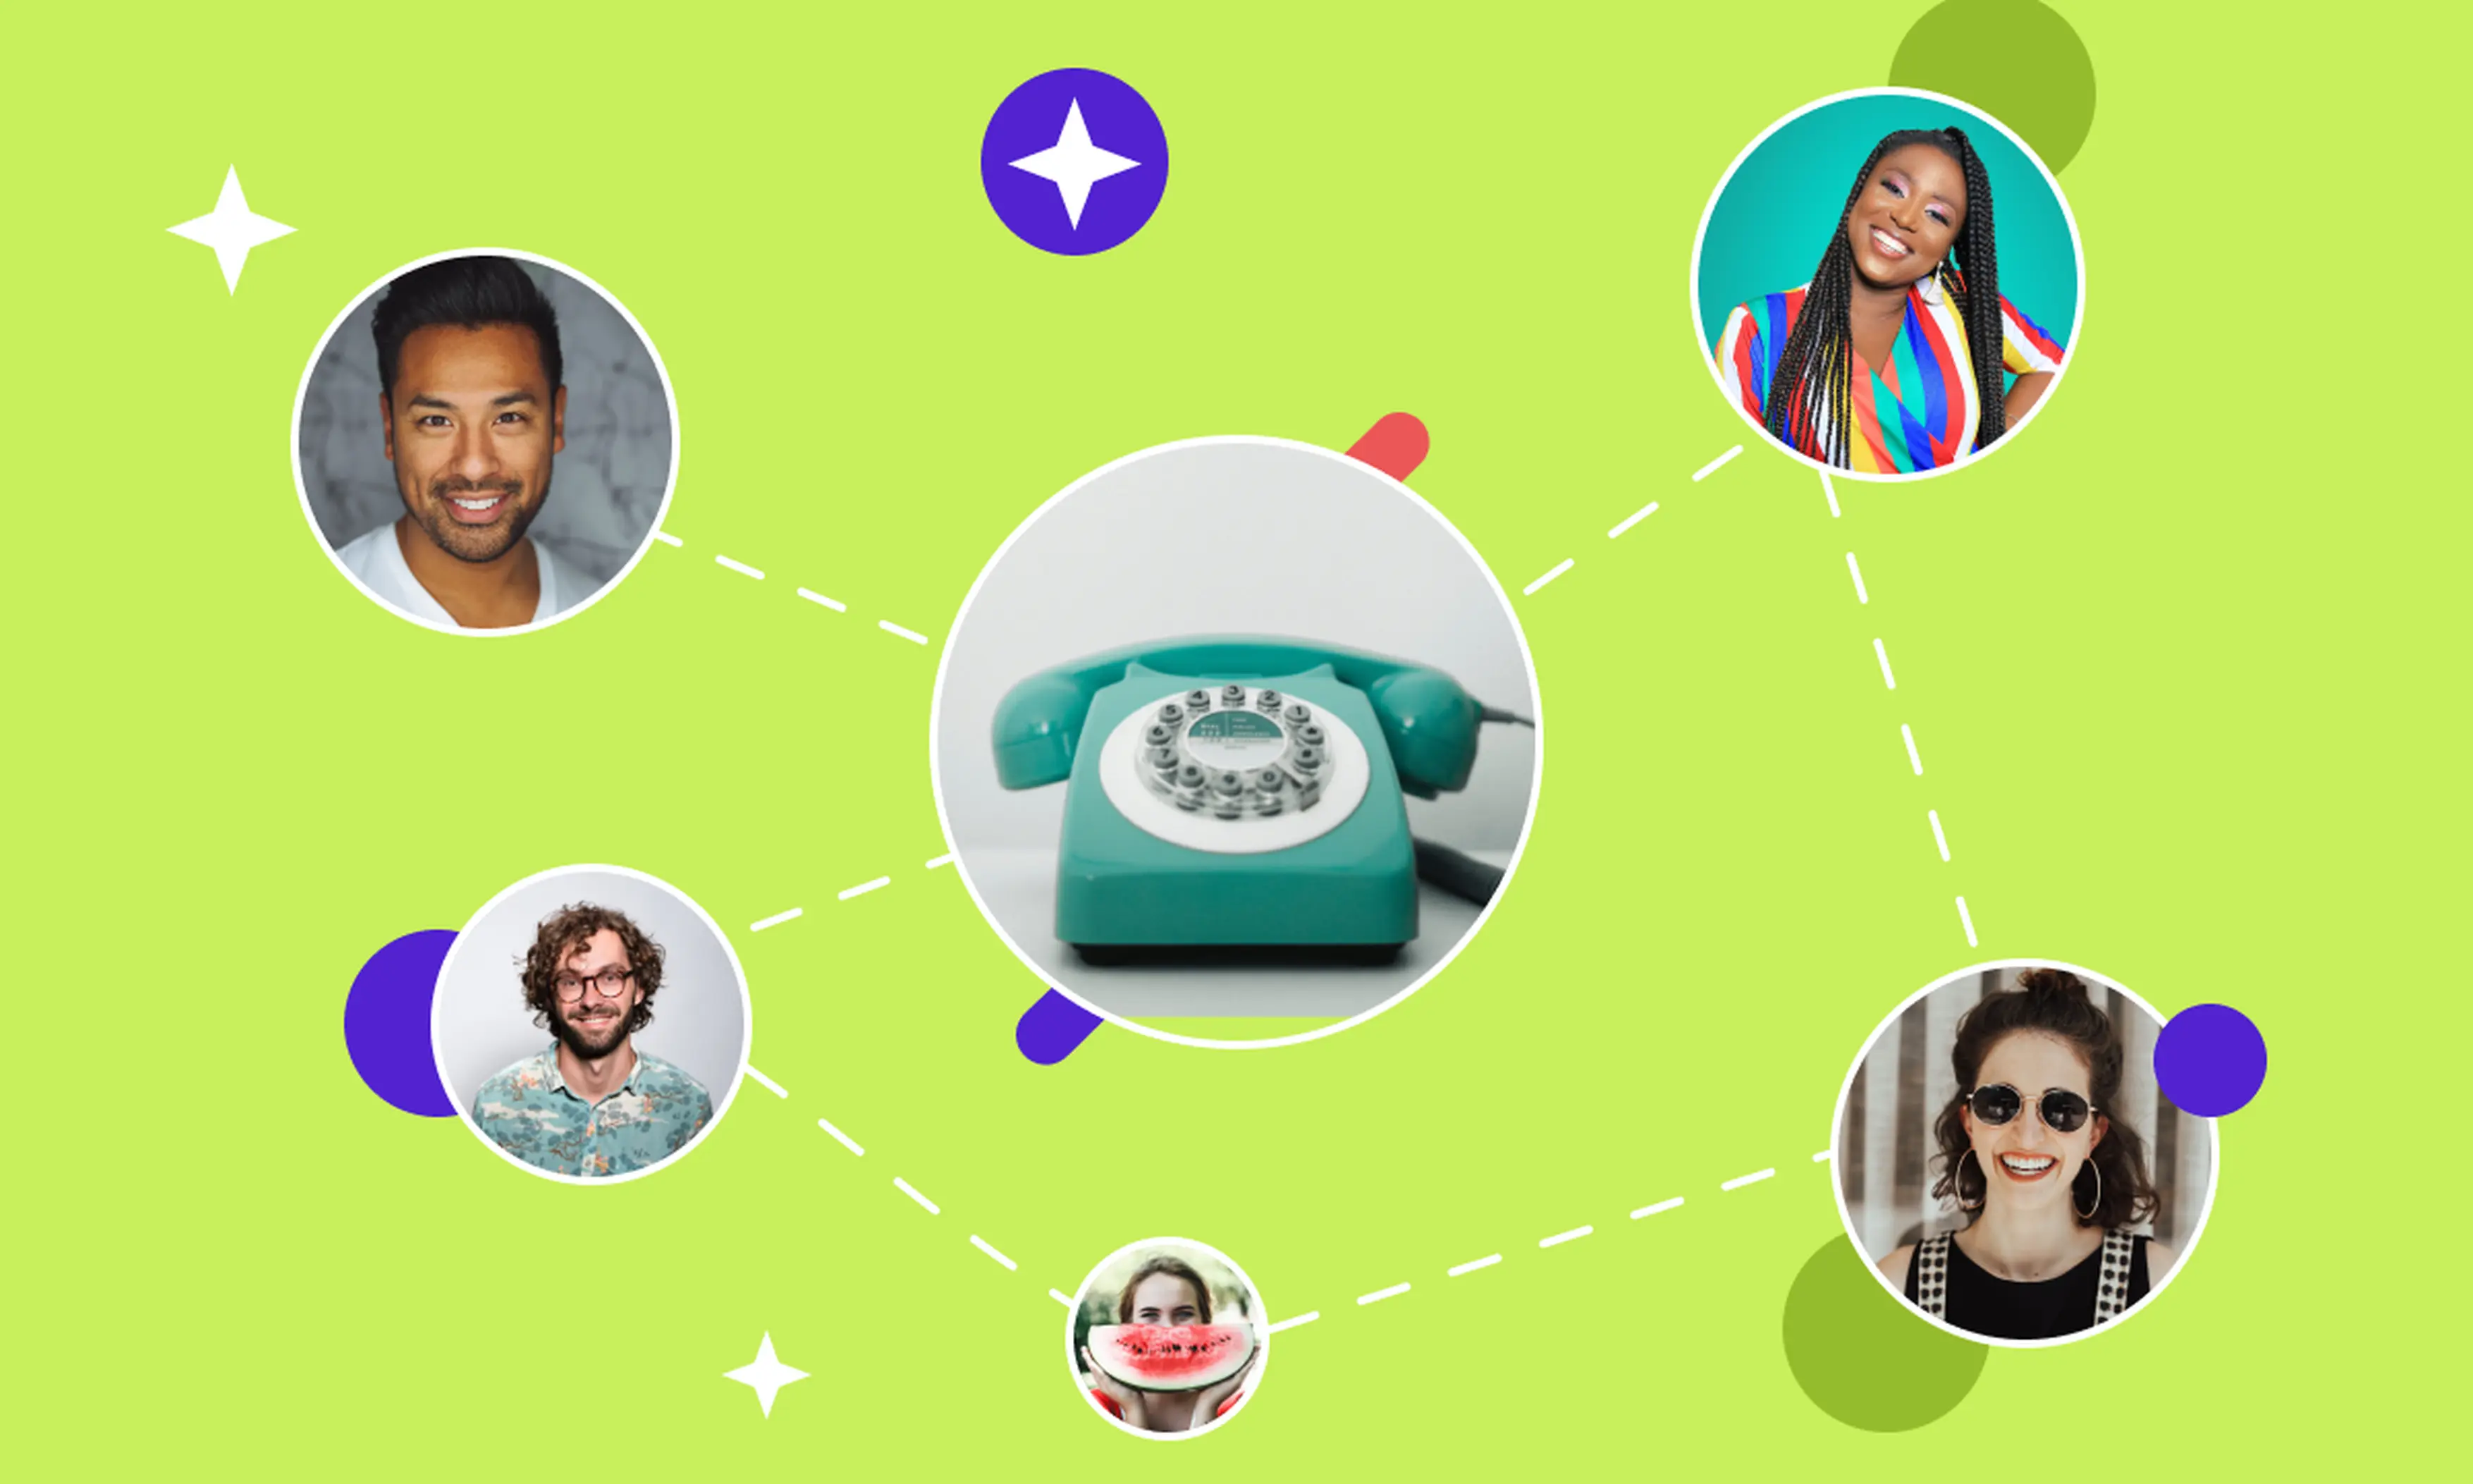 Graphics with a green background with pictures of people and a phone in a circular form.